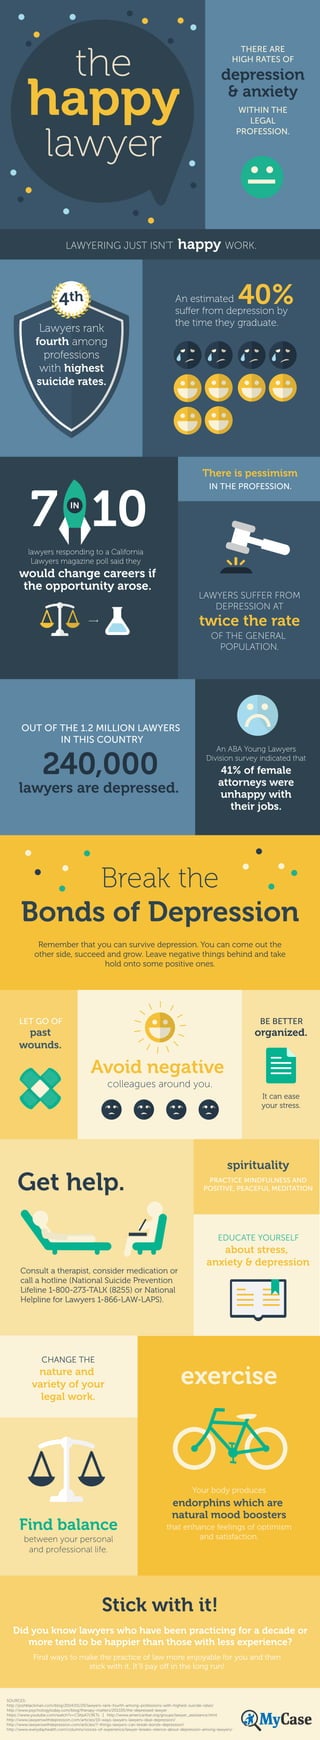 LAWYERS SUFFER FROM
DEPRESSION AT
OF THE GENERAL
POPULATION.
twice the rate
the
lawyer
happy
An estimated
suffer from depression by
the time they graduate.
40%
happy WORK.LAWYERING JUST ISN’T
7 10IN
lawyers responding to a California
Lawyers magazine poll said they
would change careers if
the opportunity arose.
THERE ARE
HIGH RATES OF
WITHIN THE
LEGAL
PROFESSION.
depression
& anxiety
Lawyers rank
fourth among
professions
with highest
suicide rates.
4th
IN THE PROFESSION.
There is pessimism
An ABA Young Lawyers
Division survey indicated that
41% of female
attorneys were
unhappy with
their jobs.
240,000
OUT OF THE 1.2 MILLION LAWYERS
IN THIS COUNTRY
lawyers are depressed.
Break the
Bonds of Depression
Remember that you can survive depression. You can come out the
other side, succeed and grow. Leave negative things behind and take
hold onto some positive ones.
spirituality
PRACTICE MINDFULNESS AND
POSITIVE, PEACEFUL MEDITATION
It can ease
your stress.
Get help.
Consult a therapist, consider medication or
call a hotline (National Suicide Prevention
Lifeline 1-800-273-TALK (8255) or National
Helpline for Lawyers 1-866-LAW-LAPS).
LET GO OF
past
wounds.
EDUCATE YOURSELF
about stress,
anxiety & depression
BE BETTER
organized.
colleagues around you.
Avoid negative
exercise
that enhance feelings of optimism
and satisfaction.
Your body produces
endorphins which are
natural mood boosters
CHANGE THE
nature and
variety of your
legal work.
between your personal
and professional life.
Find balance
Stick with it!
Did you know lawyers who have been practicing for a decade or
more tend to be happier than those with less experience?
Find ways to make the practice of law more enjoyable for you and then
stick with it. It’ll pay off in the long run!
SOURCES:
http://joshblackman.com/blog/2014/01/20/lawyers-rank-fourth-among-professions-with-highest-suicide-rates/
http://www.psychologytoday.com/blog/therapy-matters/201105/the-depressed-lawyer
https://www.youtube.com/watch?v=CSKpA7c9ETs | http://www.americanbar.org/groups/lawyer_assistance.html
http://www.lawyerswithdepression.com/articles/10-ways-lawyers-lawyers-deal-depression/
http://www.lawyerswithdepression.com/articles/7-things-lawyers-can-break-bonds-depression/
http://www.everydayhealth.com/columns/voices-of-experience/lawyer-breaks-silence-about-depression-among-lawyers/
 